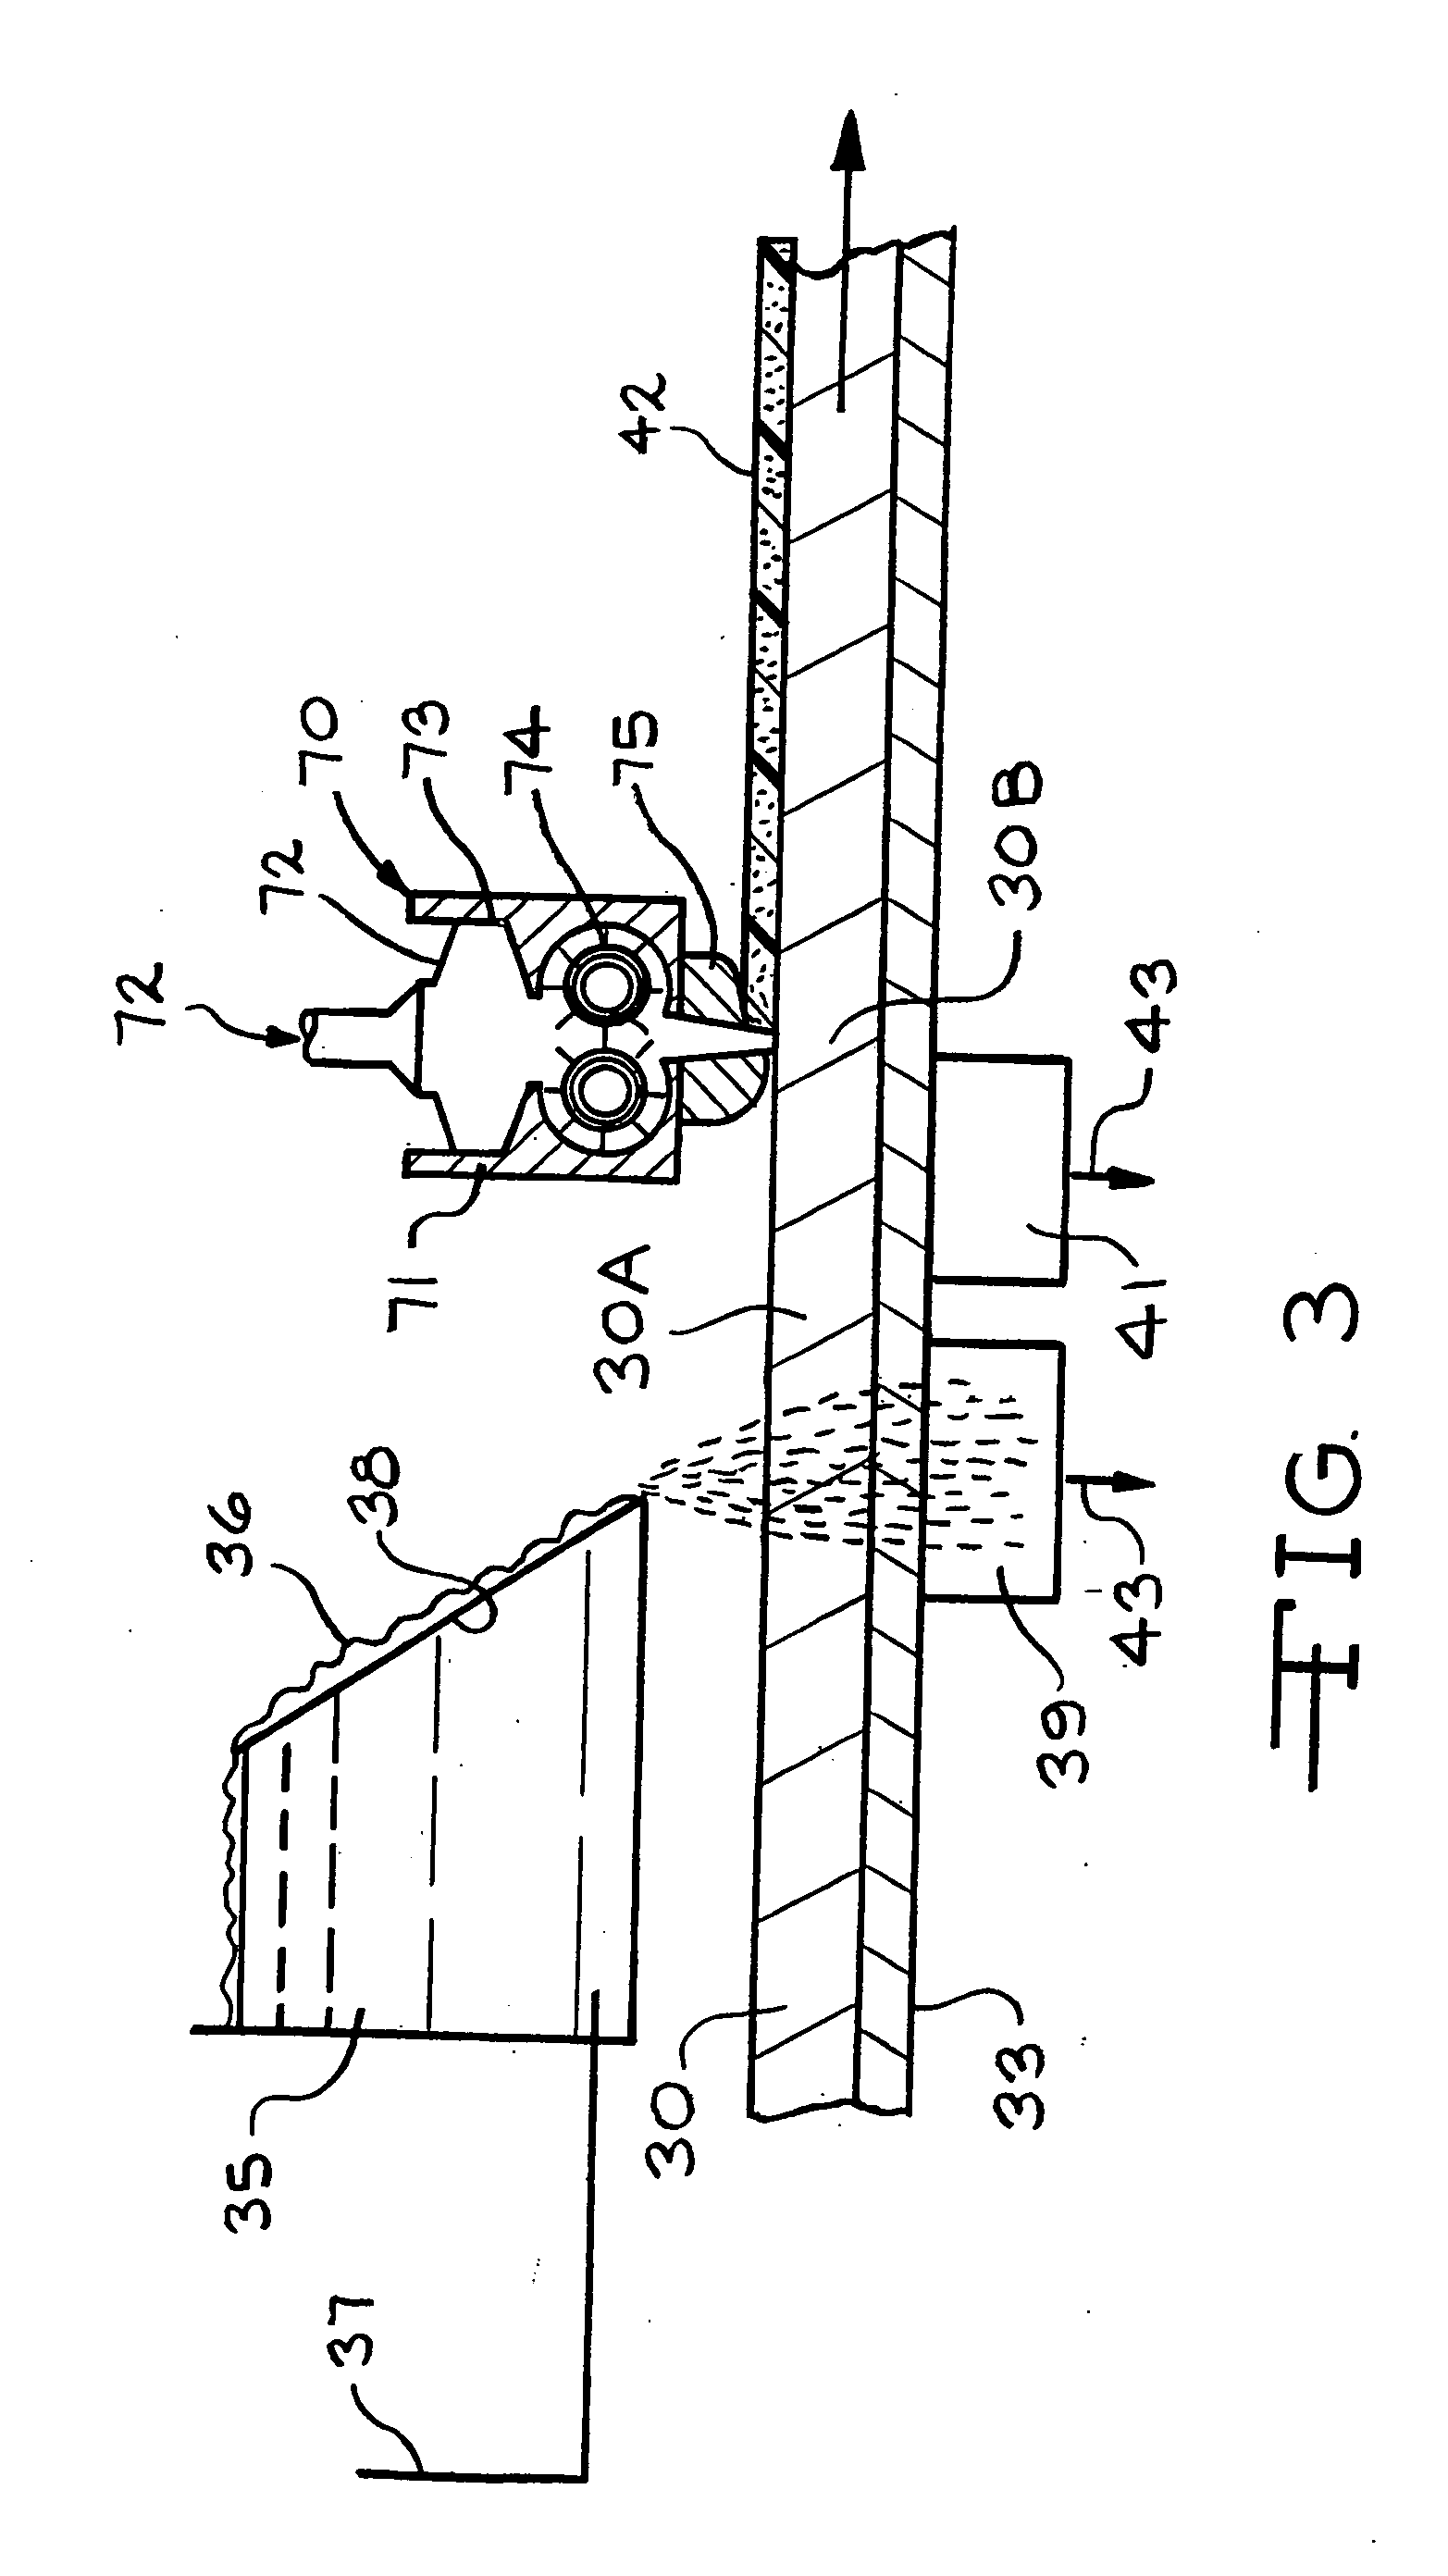 Method of making foam coated mat online and coated mat product